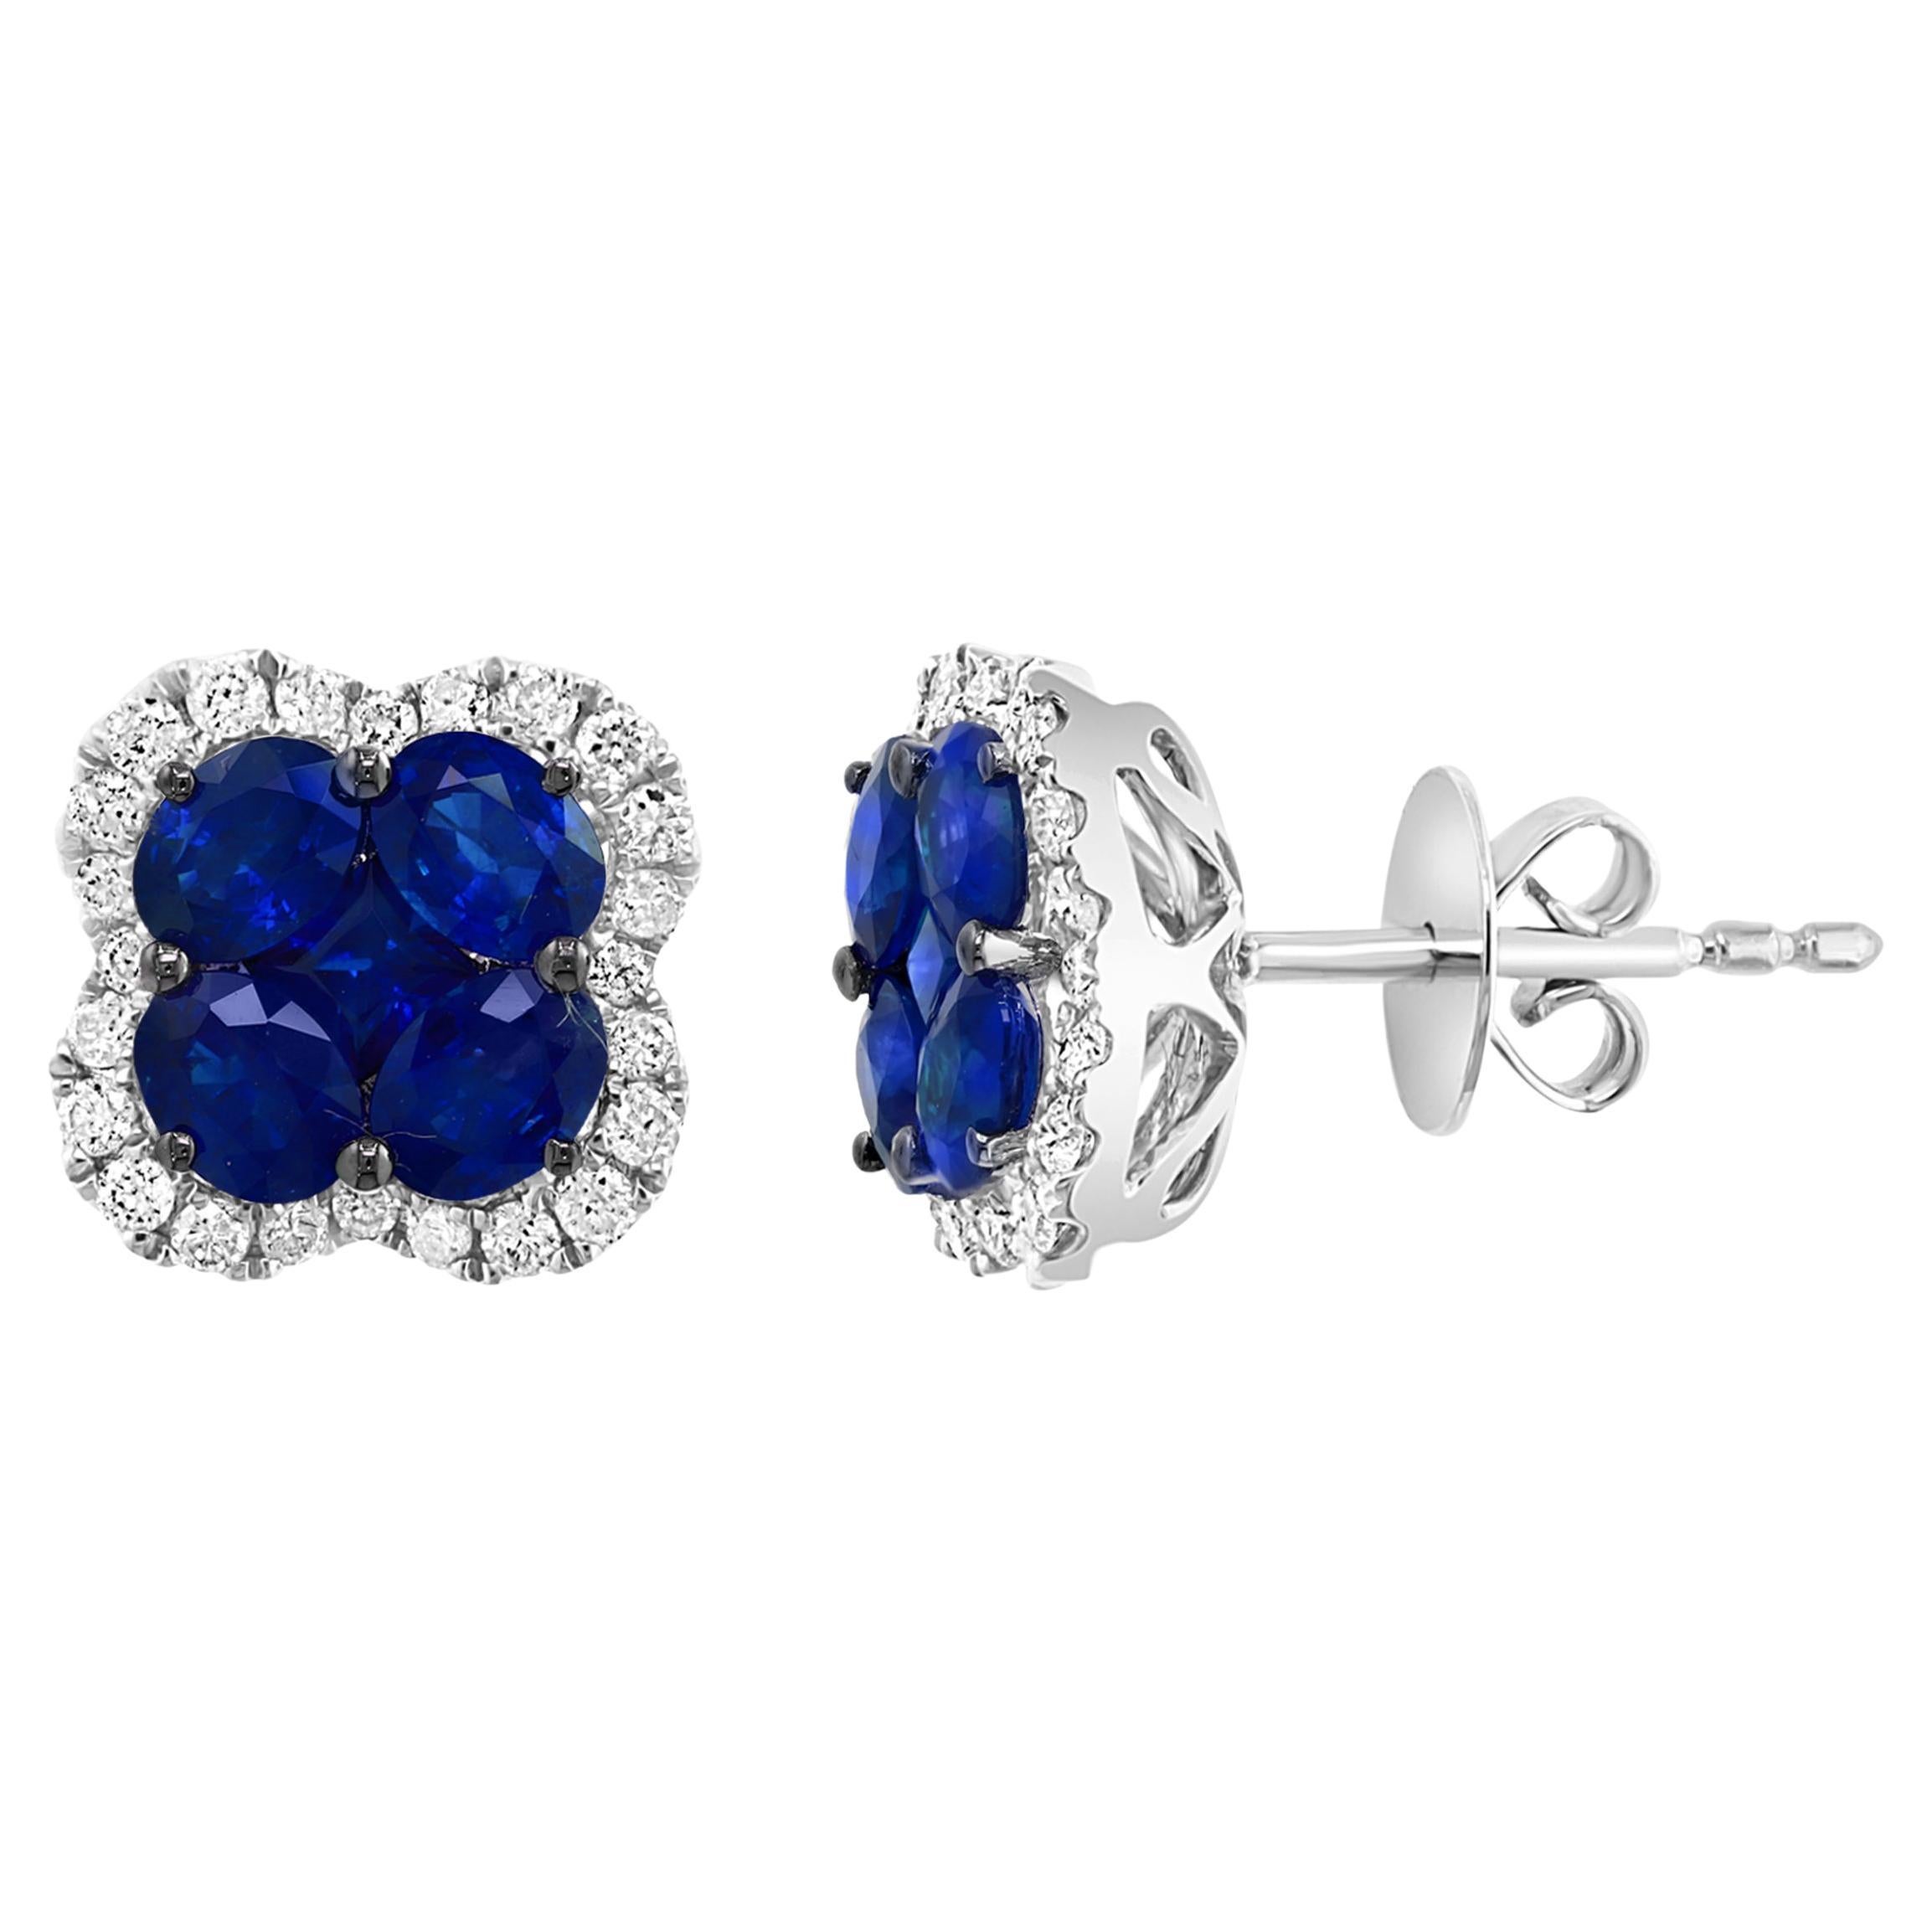 1.85 Carat Oval Cut Blue Sapphire and Diamond Stud Earrings in 18K White Gold For Sale